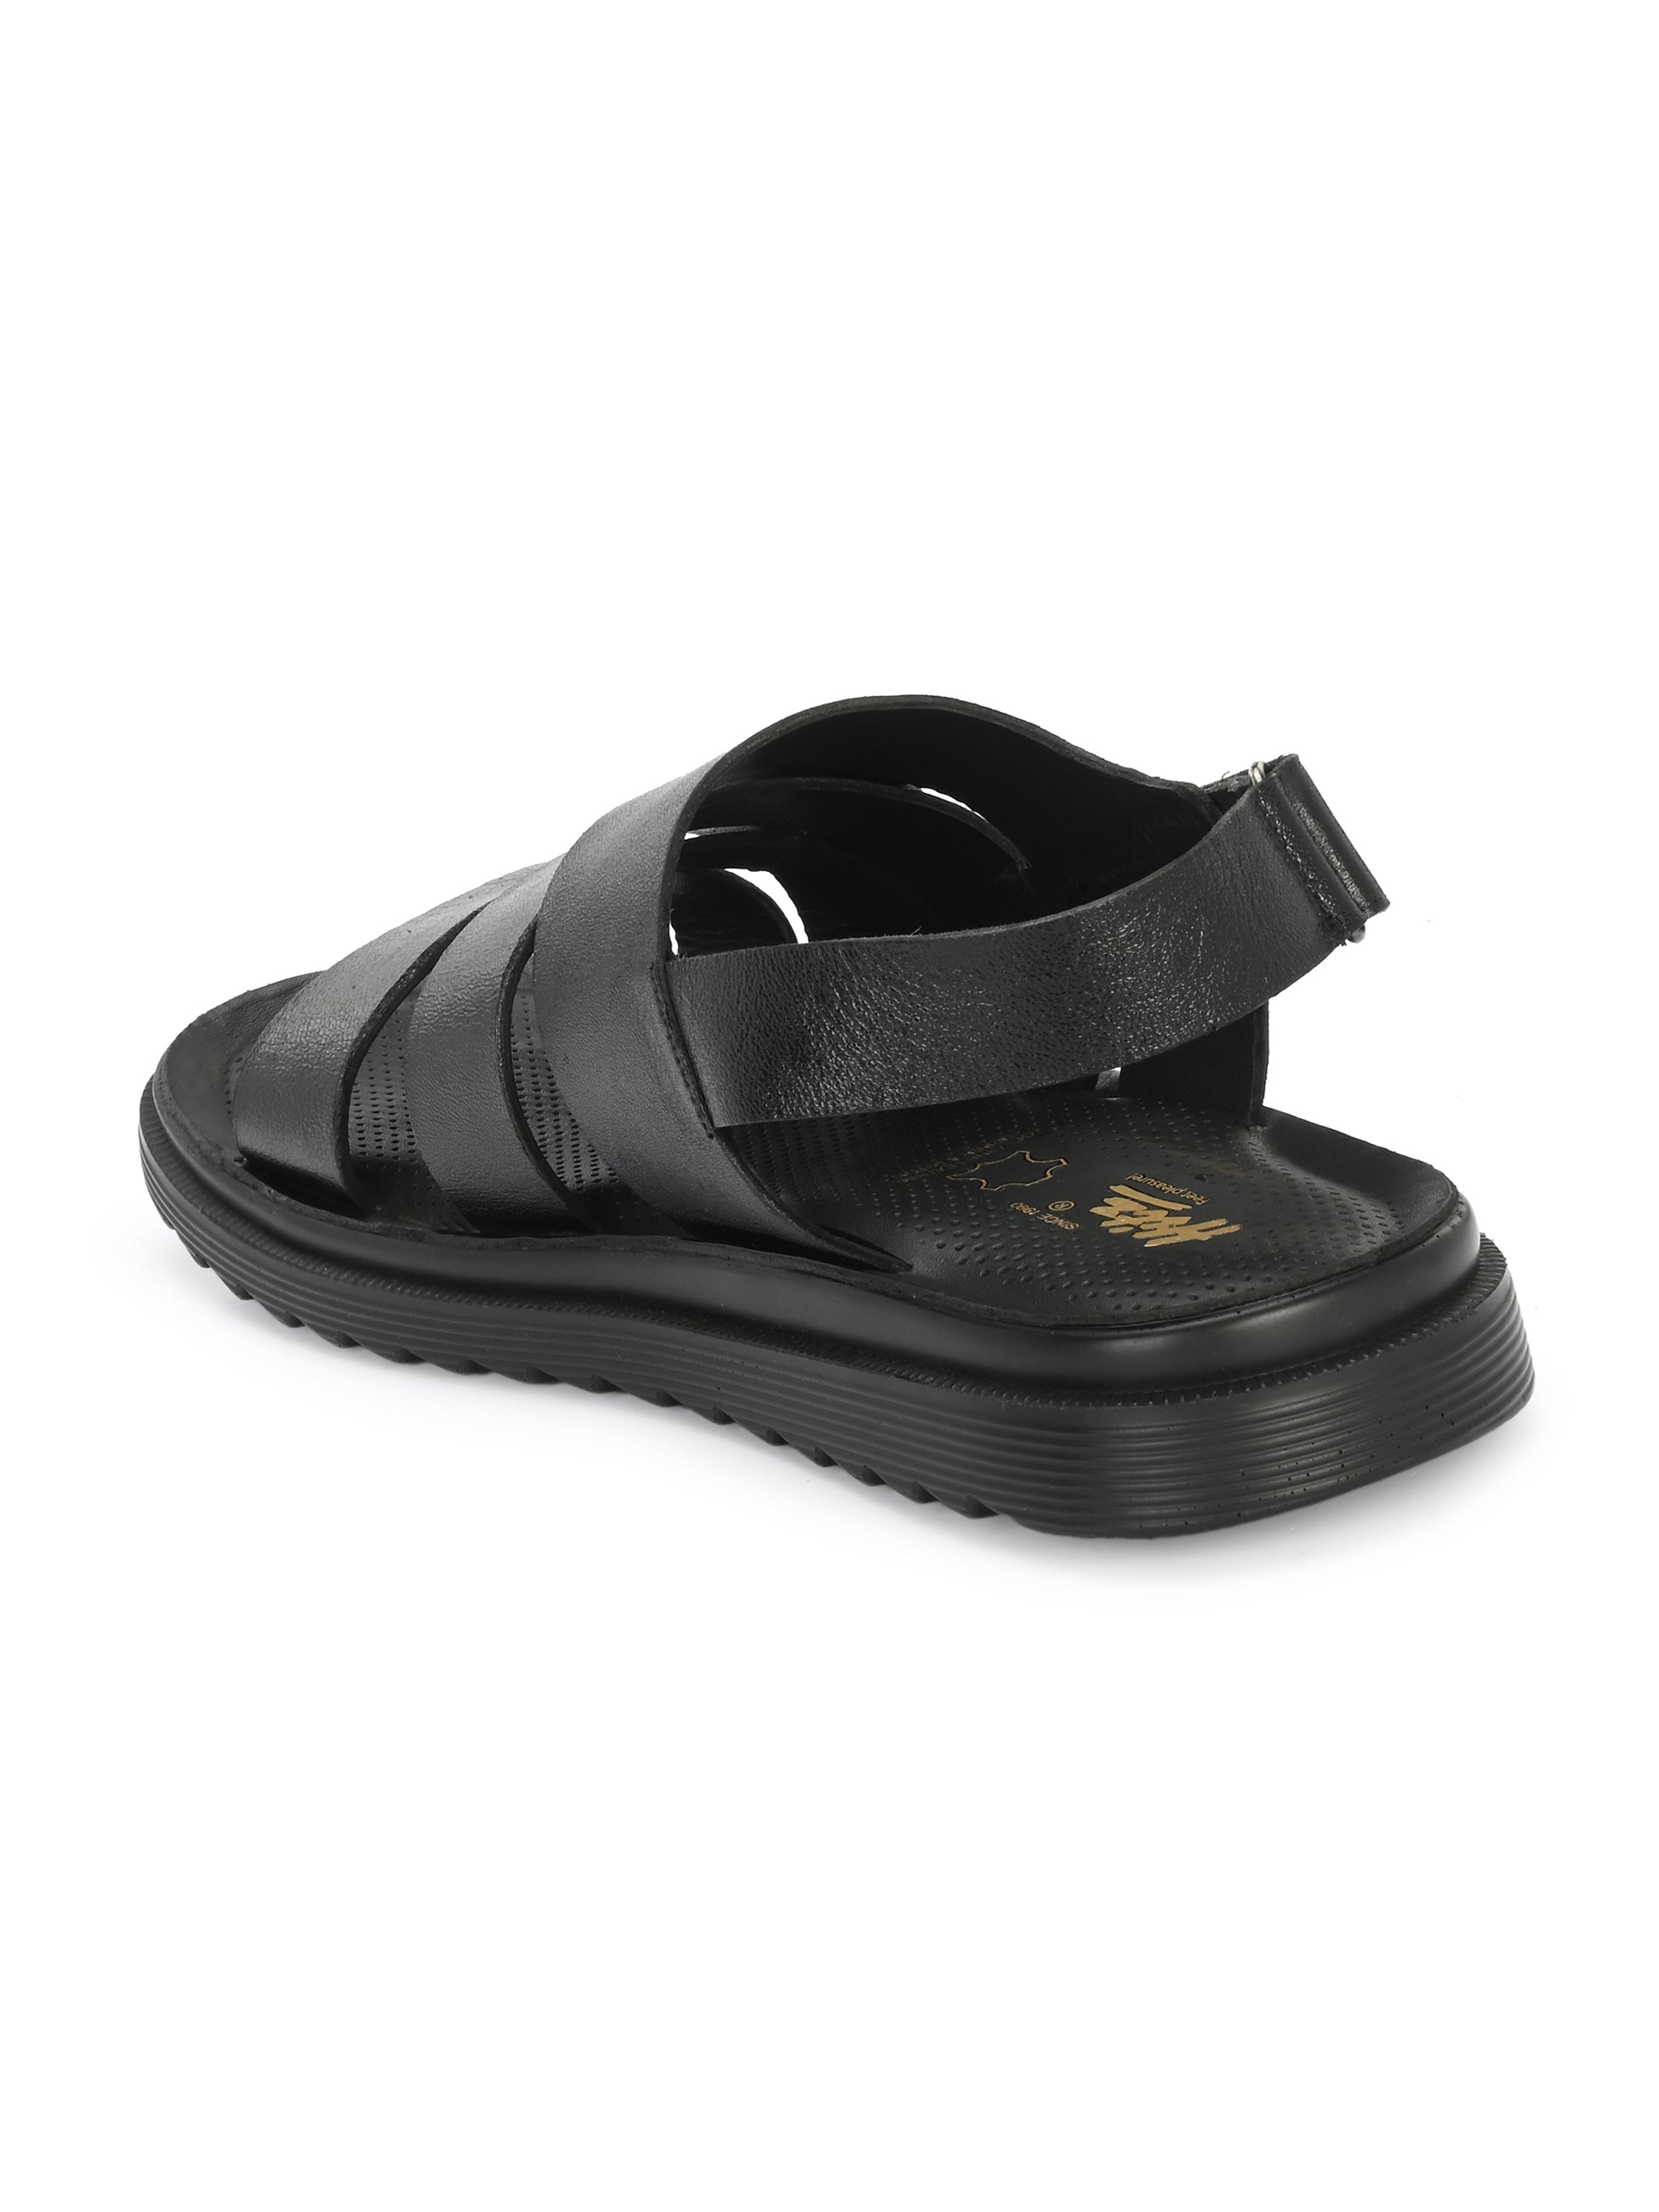 UrbanMark Men Perforated Water-Resistance Clog Sandals- Navy - Buy  UrbanMark Men Perforated Water-Resistance Clog Sandals- Navy Online at Best  Prices in India on Snapdeal